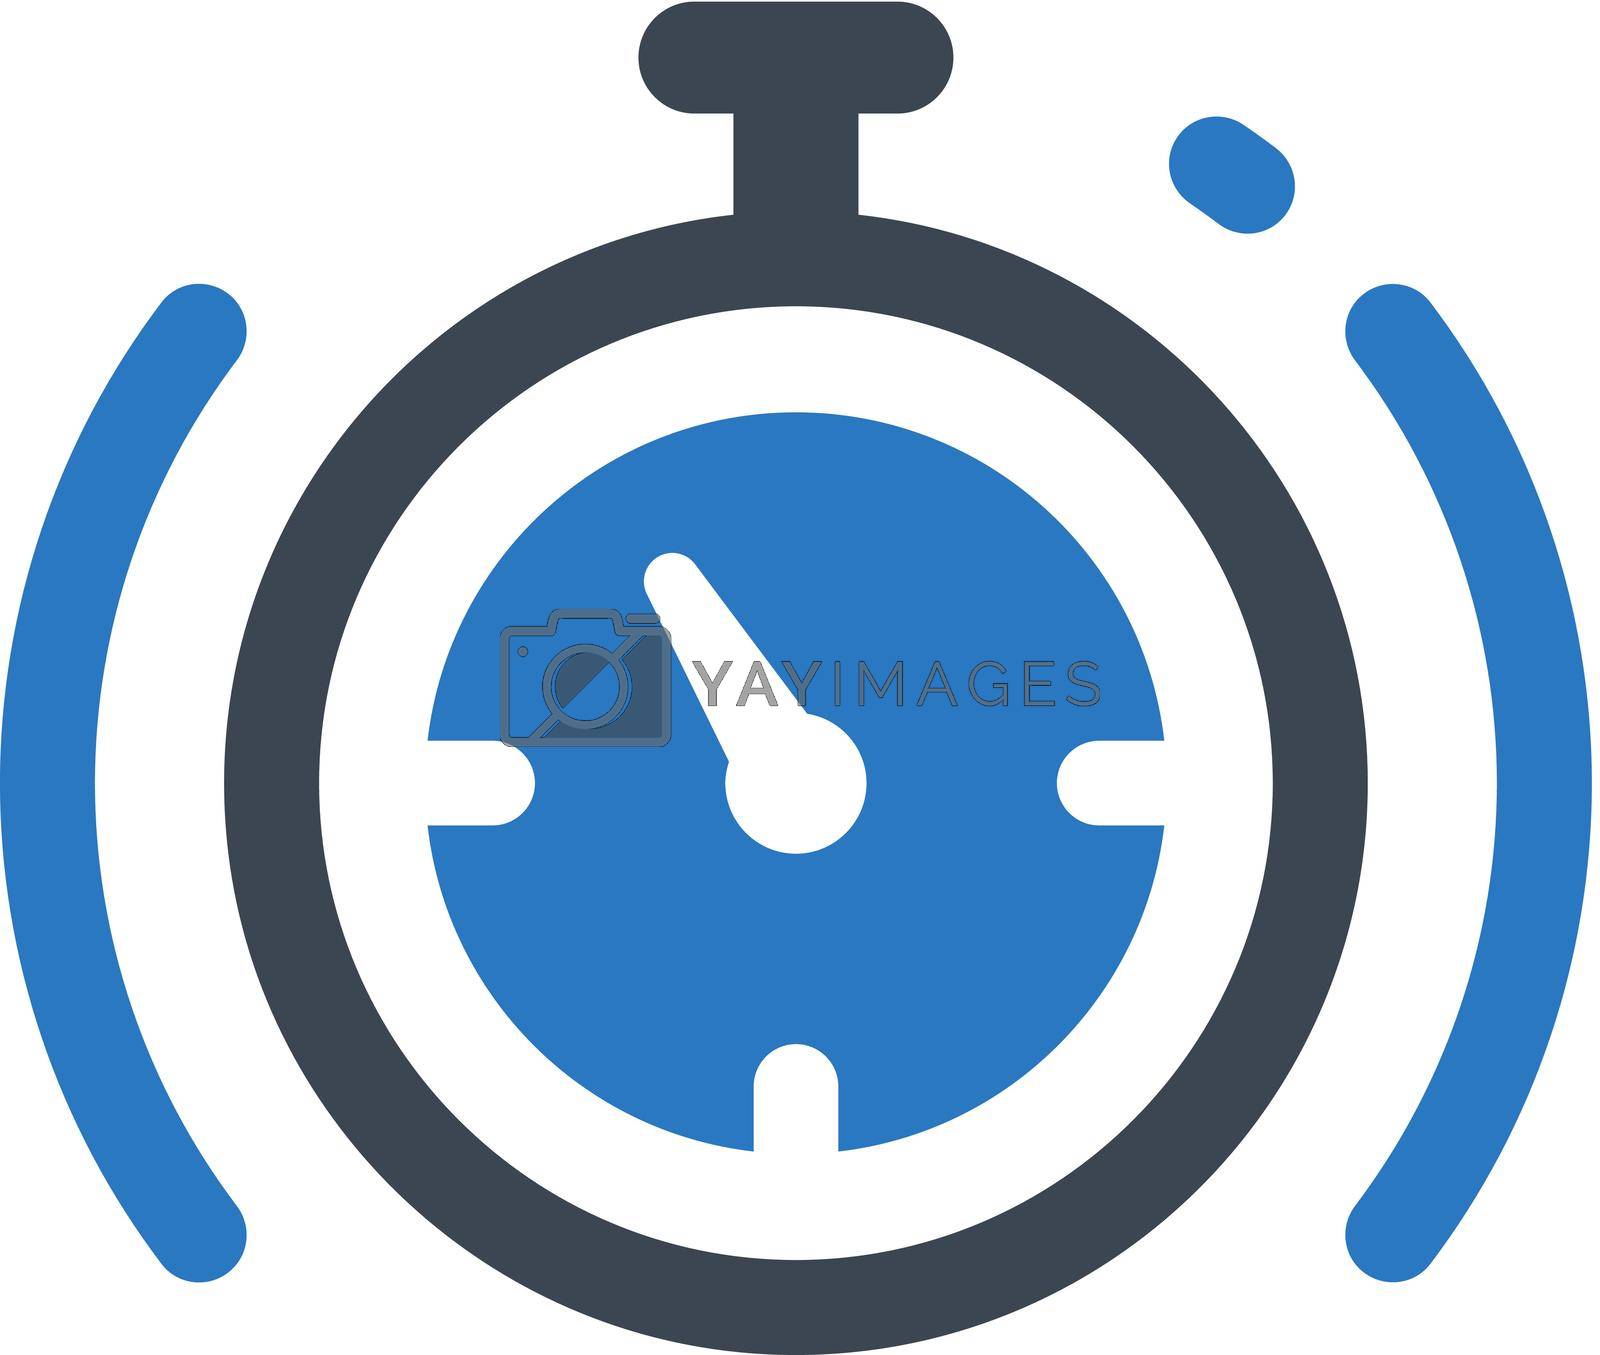 Royalty free image of Response time icon by delwar018